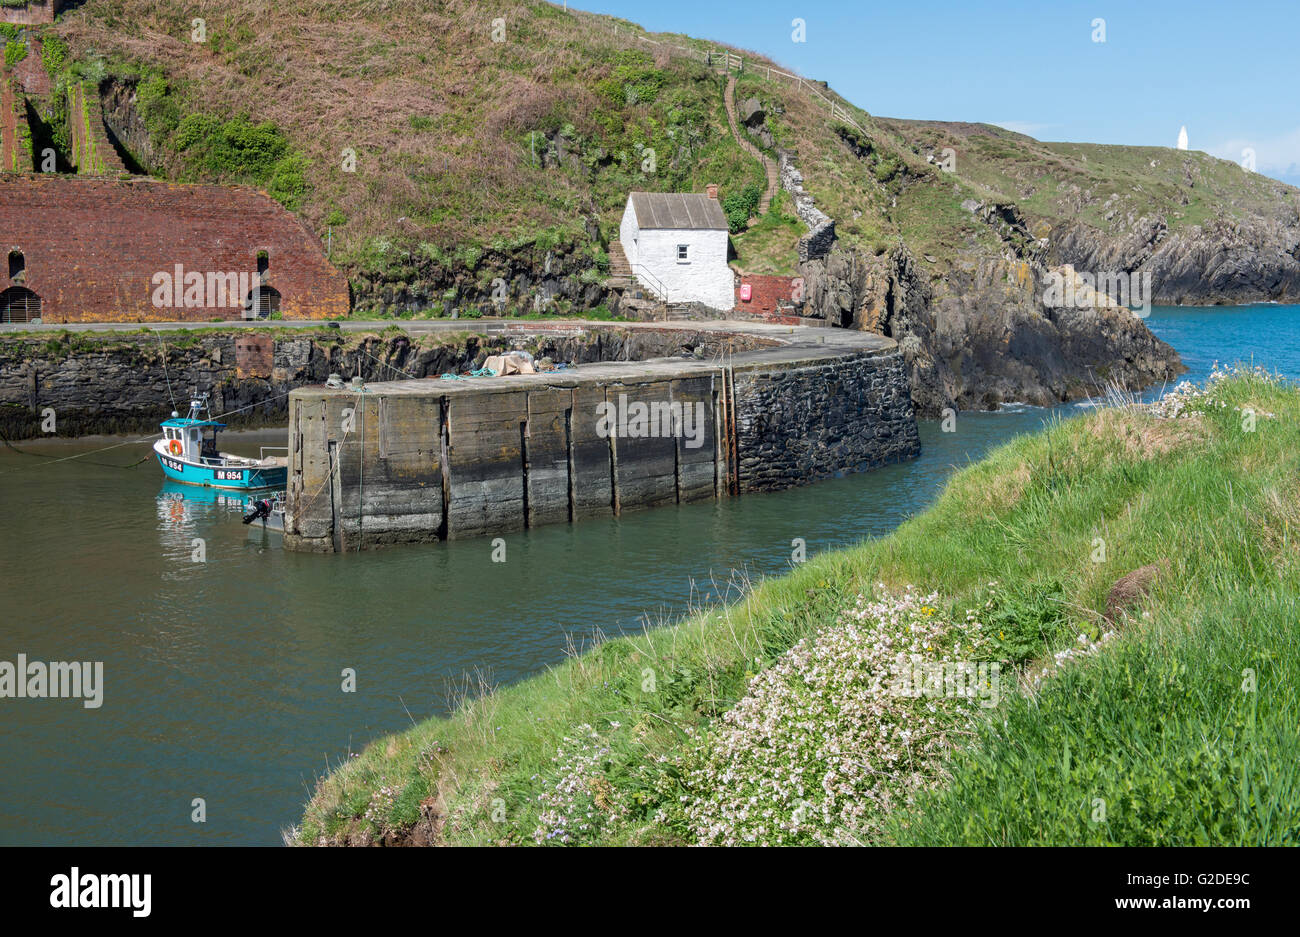 Entrance to Porthgain Harbour on the Pembrokeshire Coast National Park Coastline, west Wales, on a sunny Spring day Stock Photo